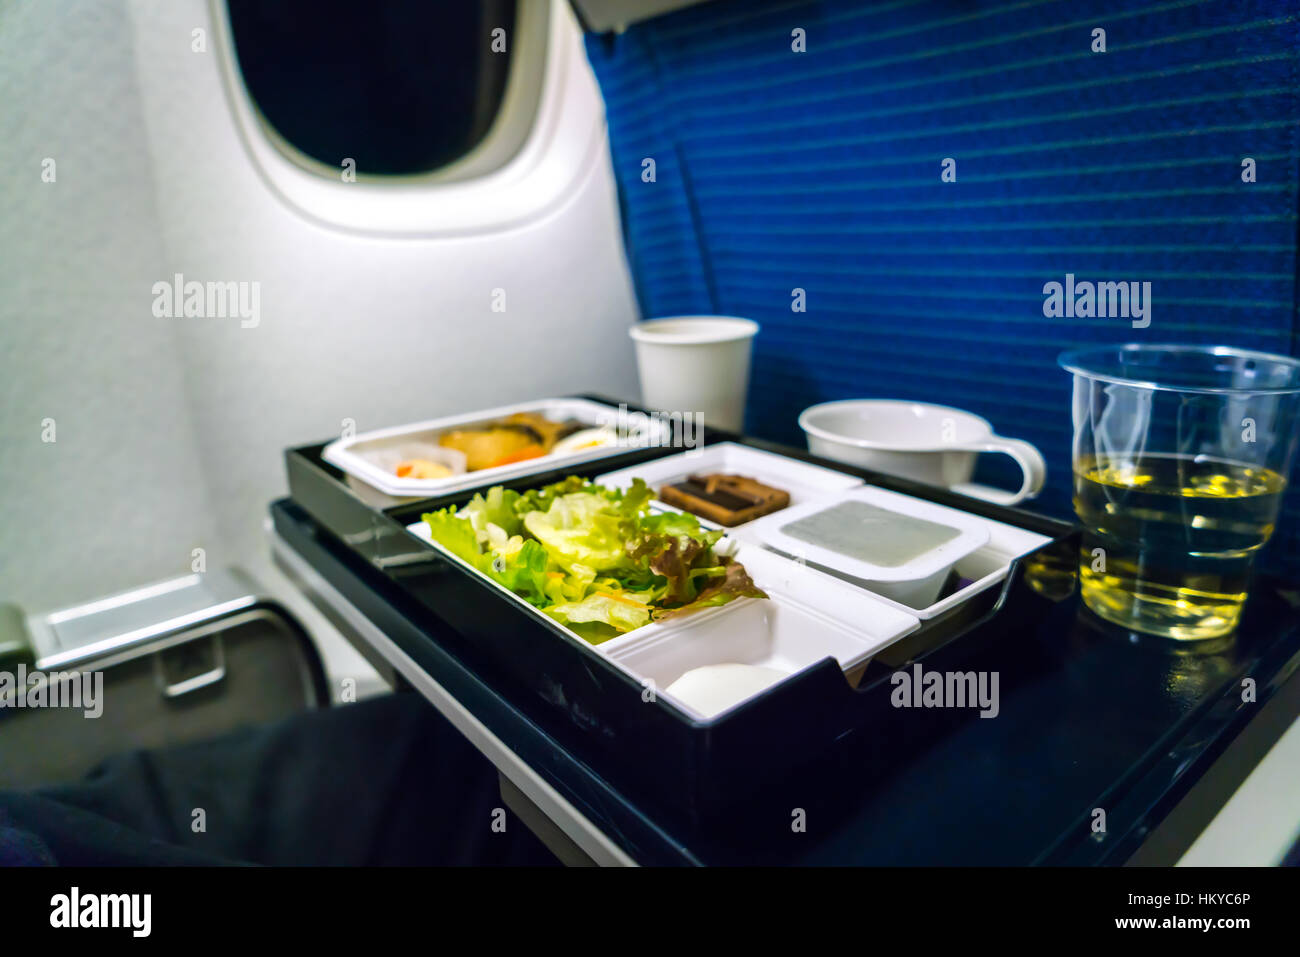 Tray of food on plane Stock Photo